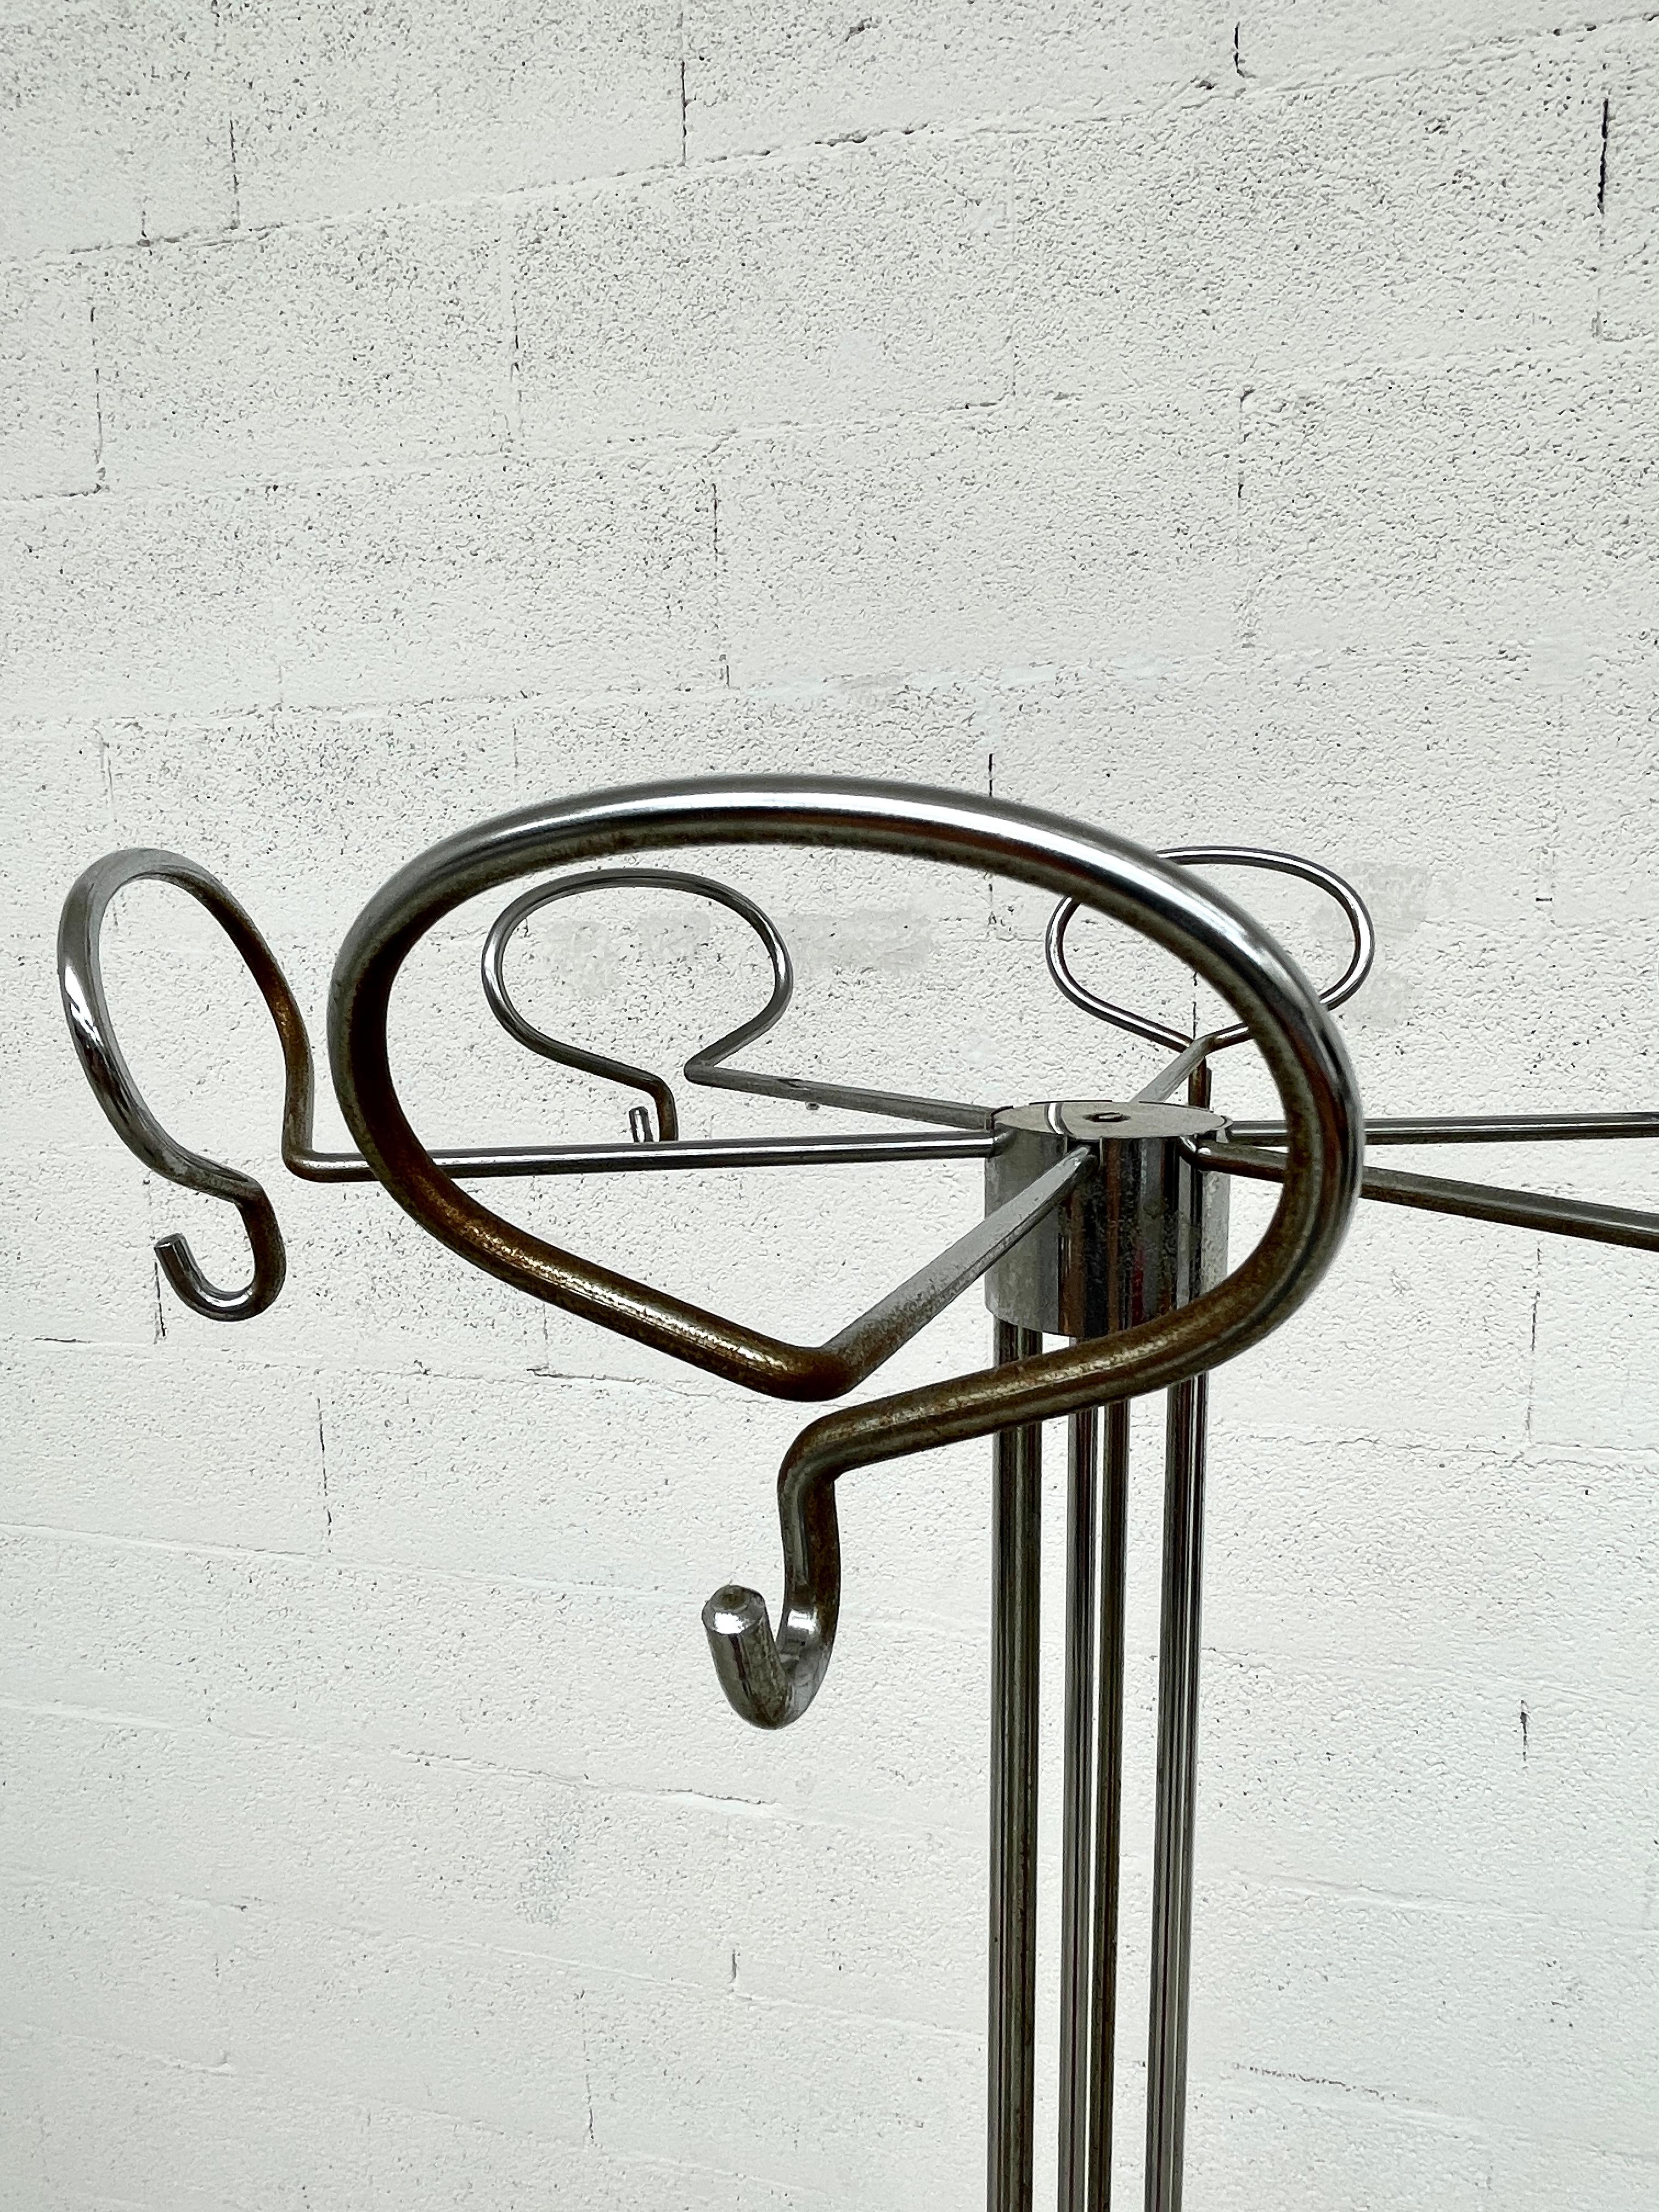 Chromed Metal Clothes Hanger by Isao Hosoe for Valenti 70s In Good Condition For Sale In Padova, IT